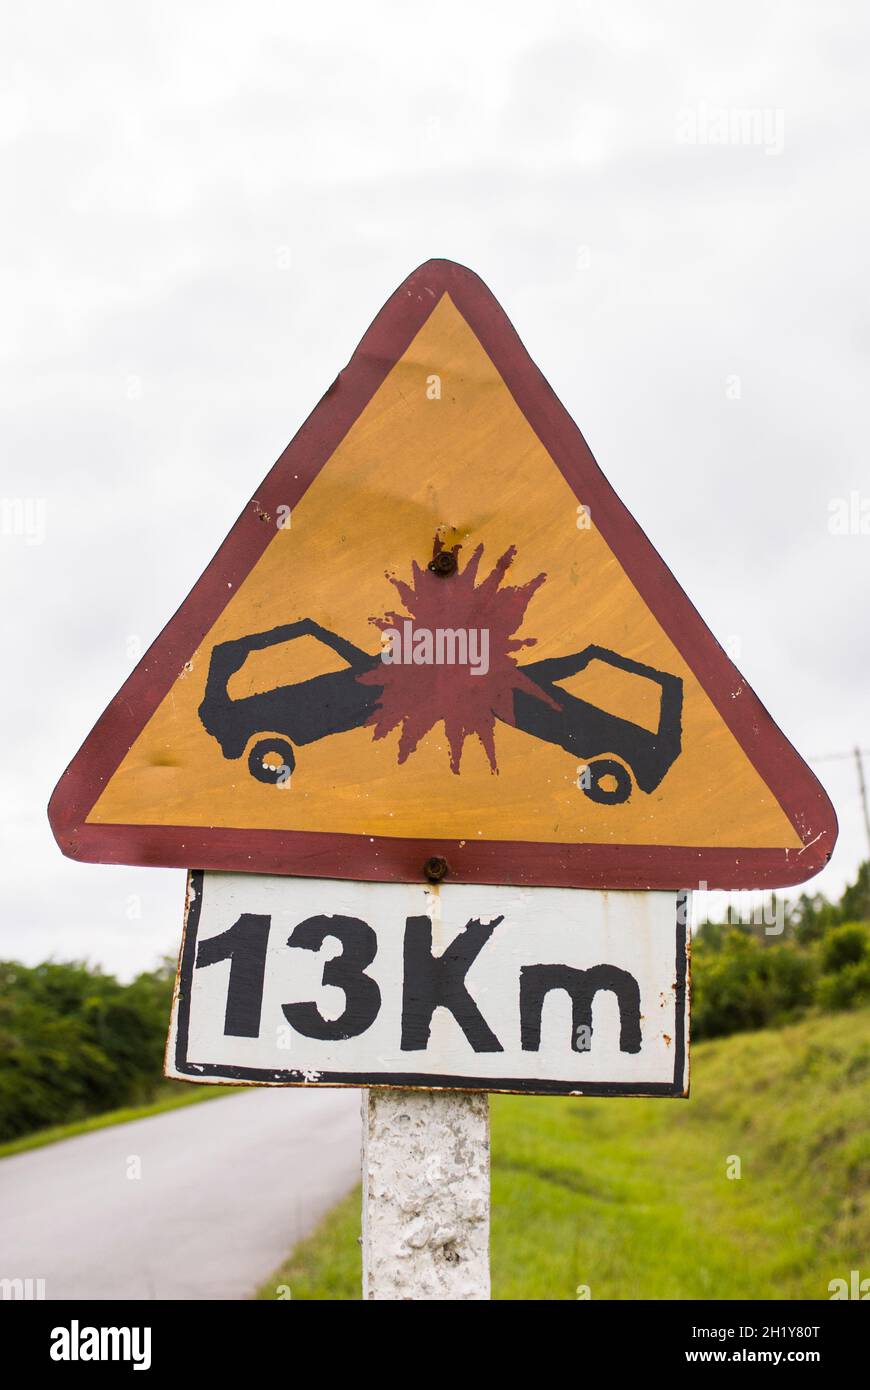 Comical road sign depicting head on collision between two cars resulting in large red explosion to warn of accident risk. Cuba. Stock Photo